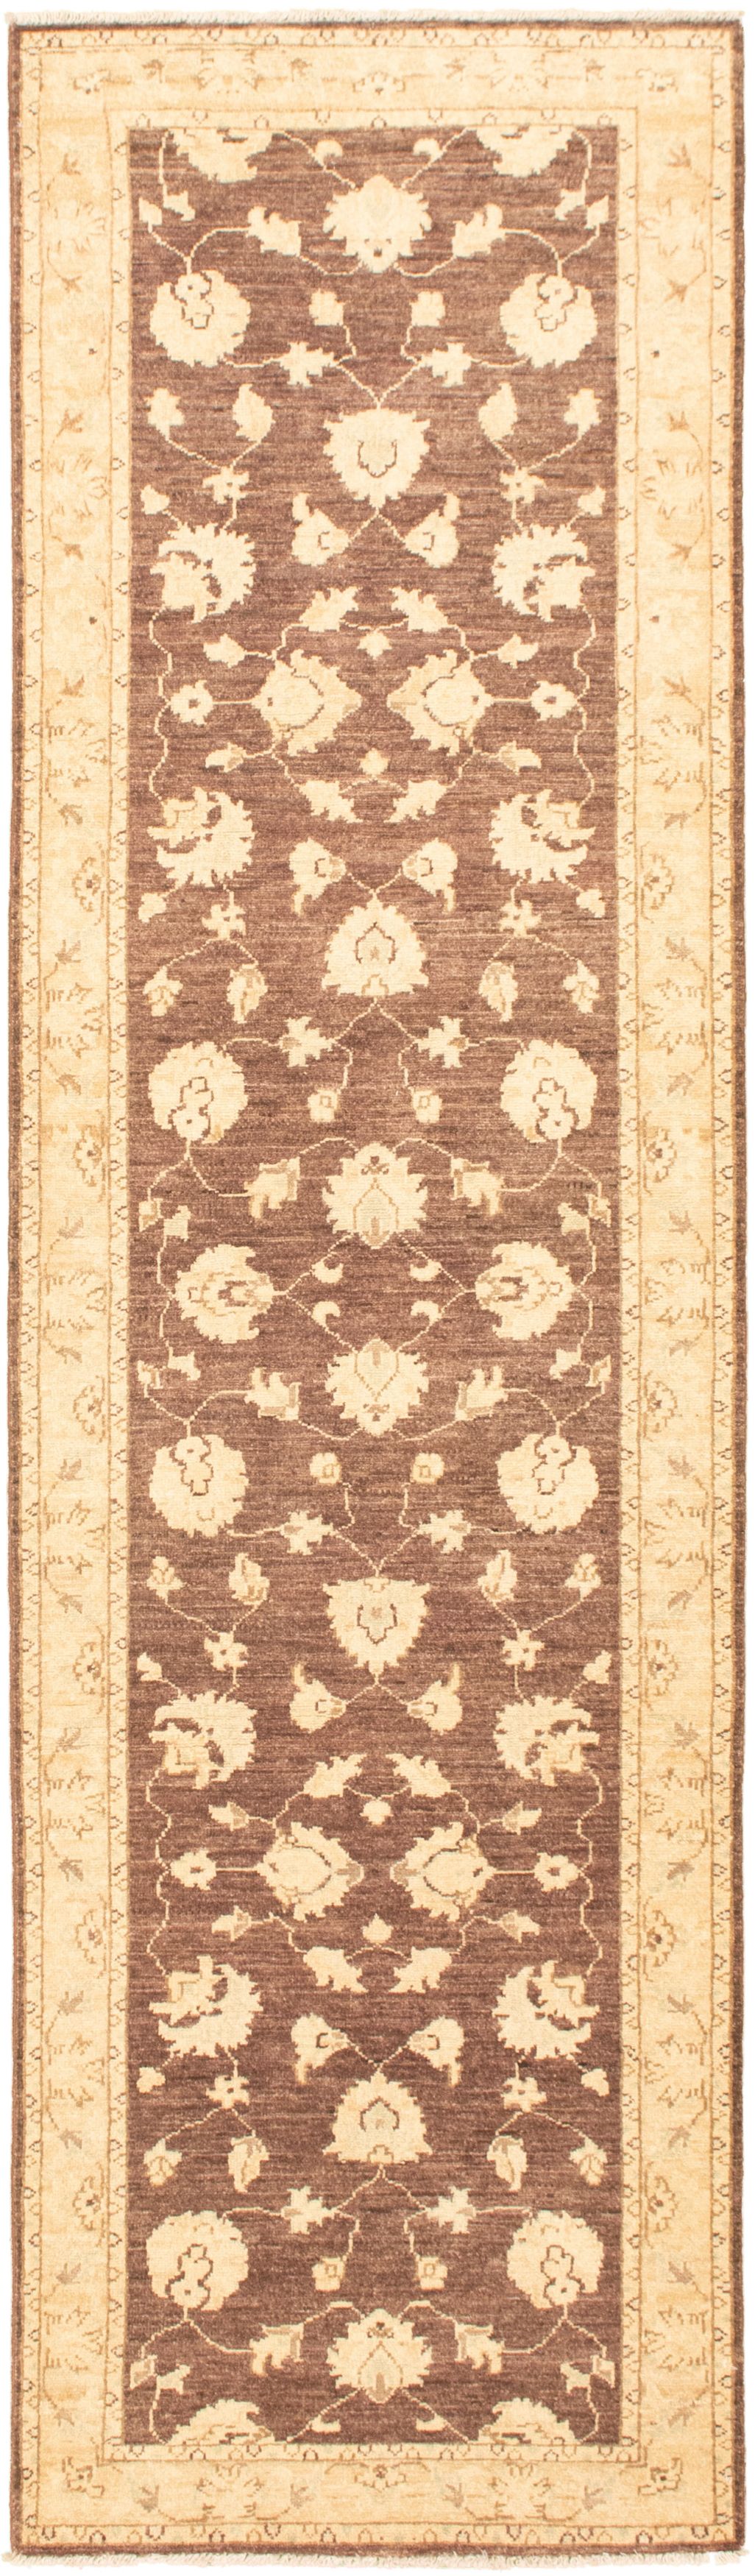 Hand-knotted Chobi Finest Brown Wool Rug 2'6" x 9'10" Size: 2'6" x 9'10"  